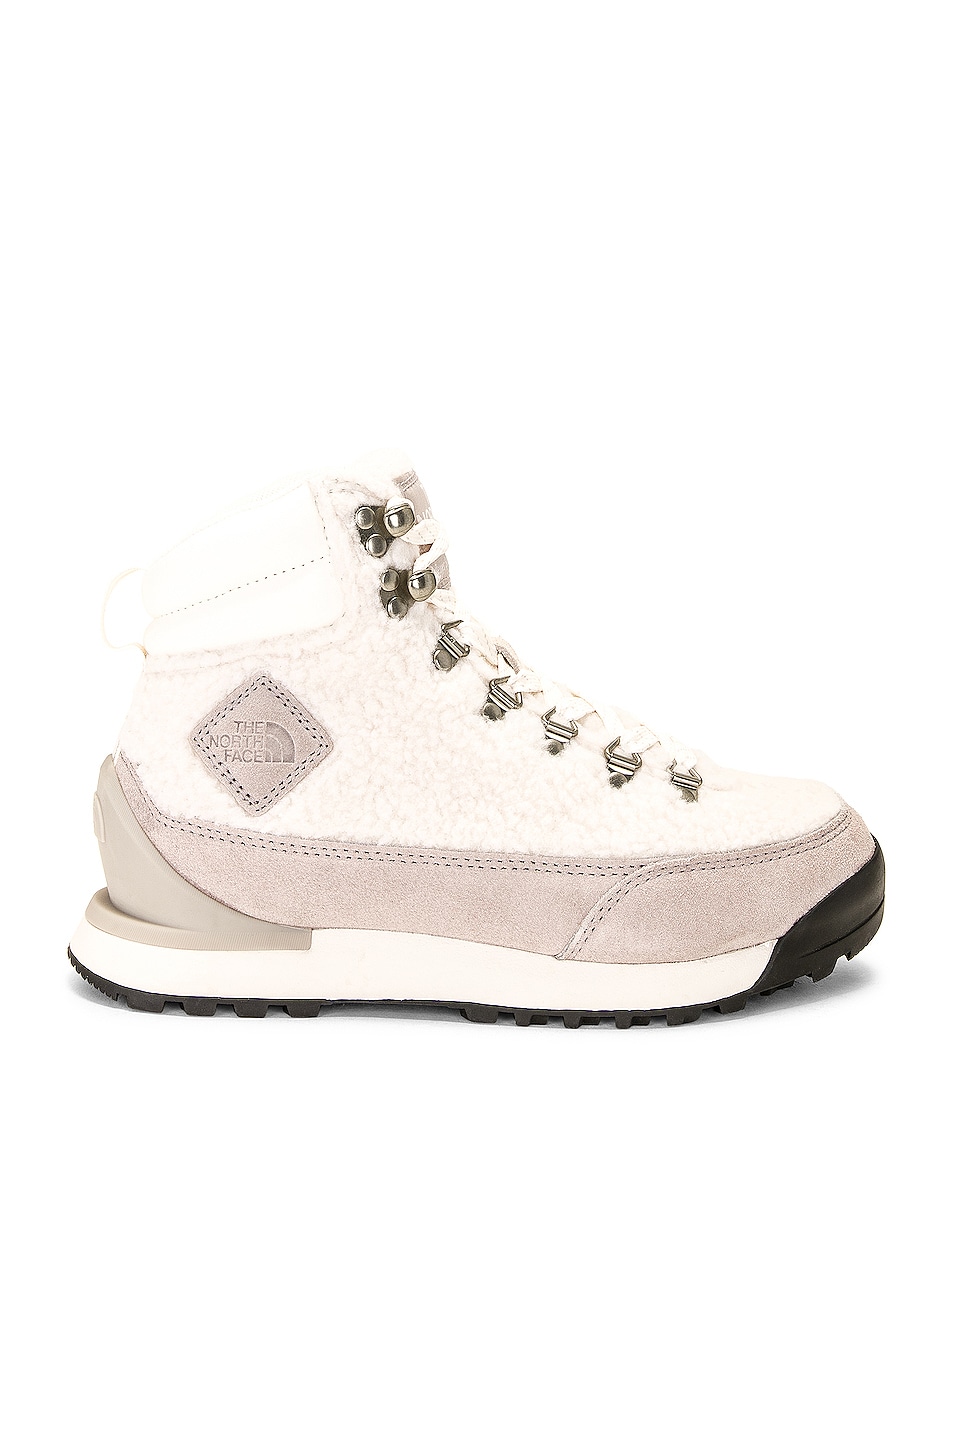 Image 1 of The North Face Back To Berkeley Iv High Pile Boot in Gardenia White & Silver Grey